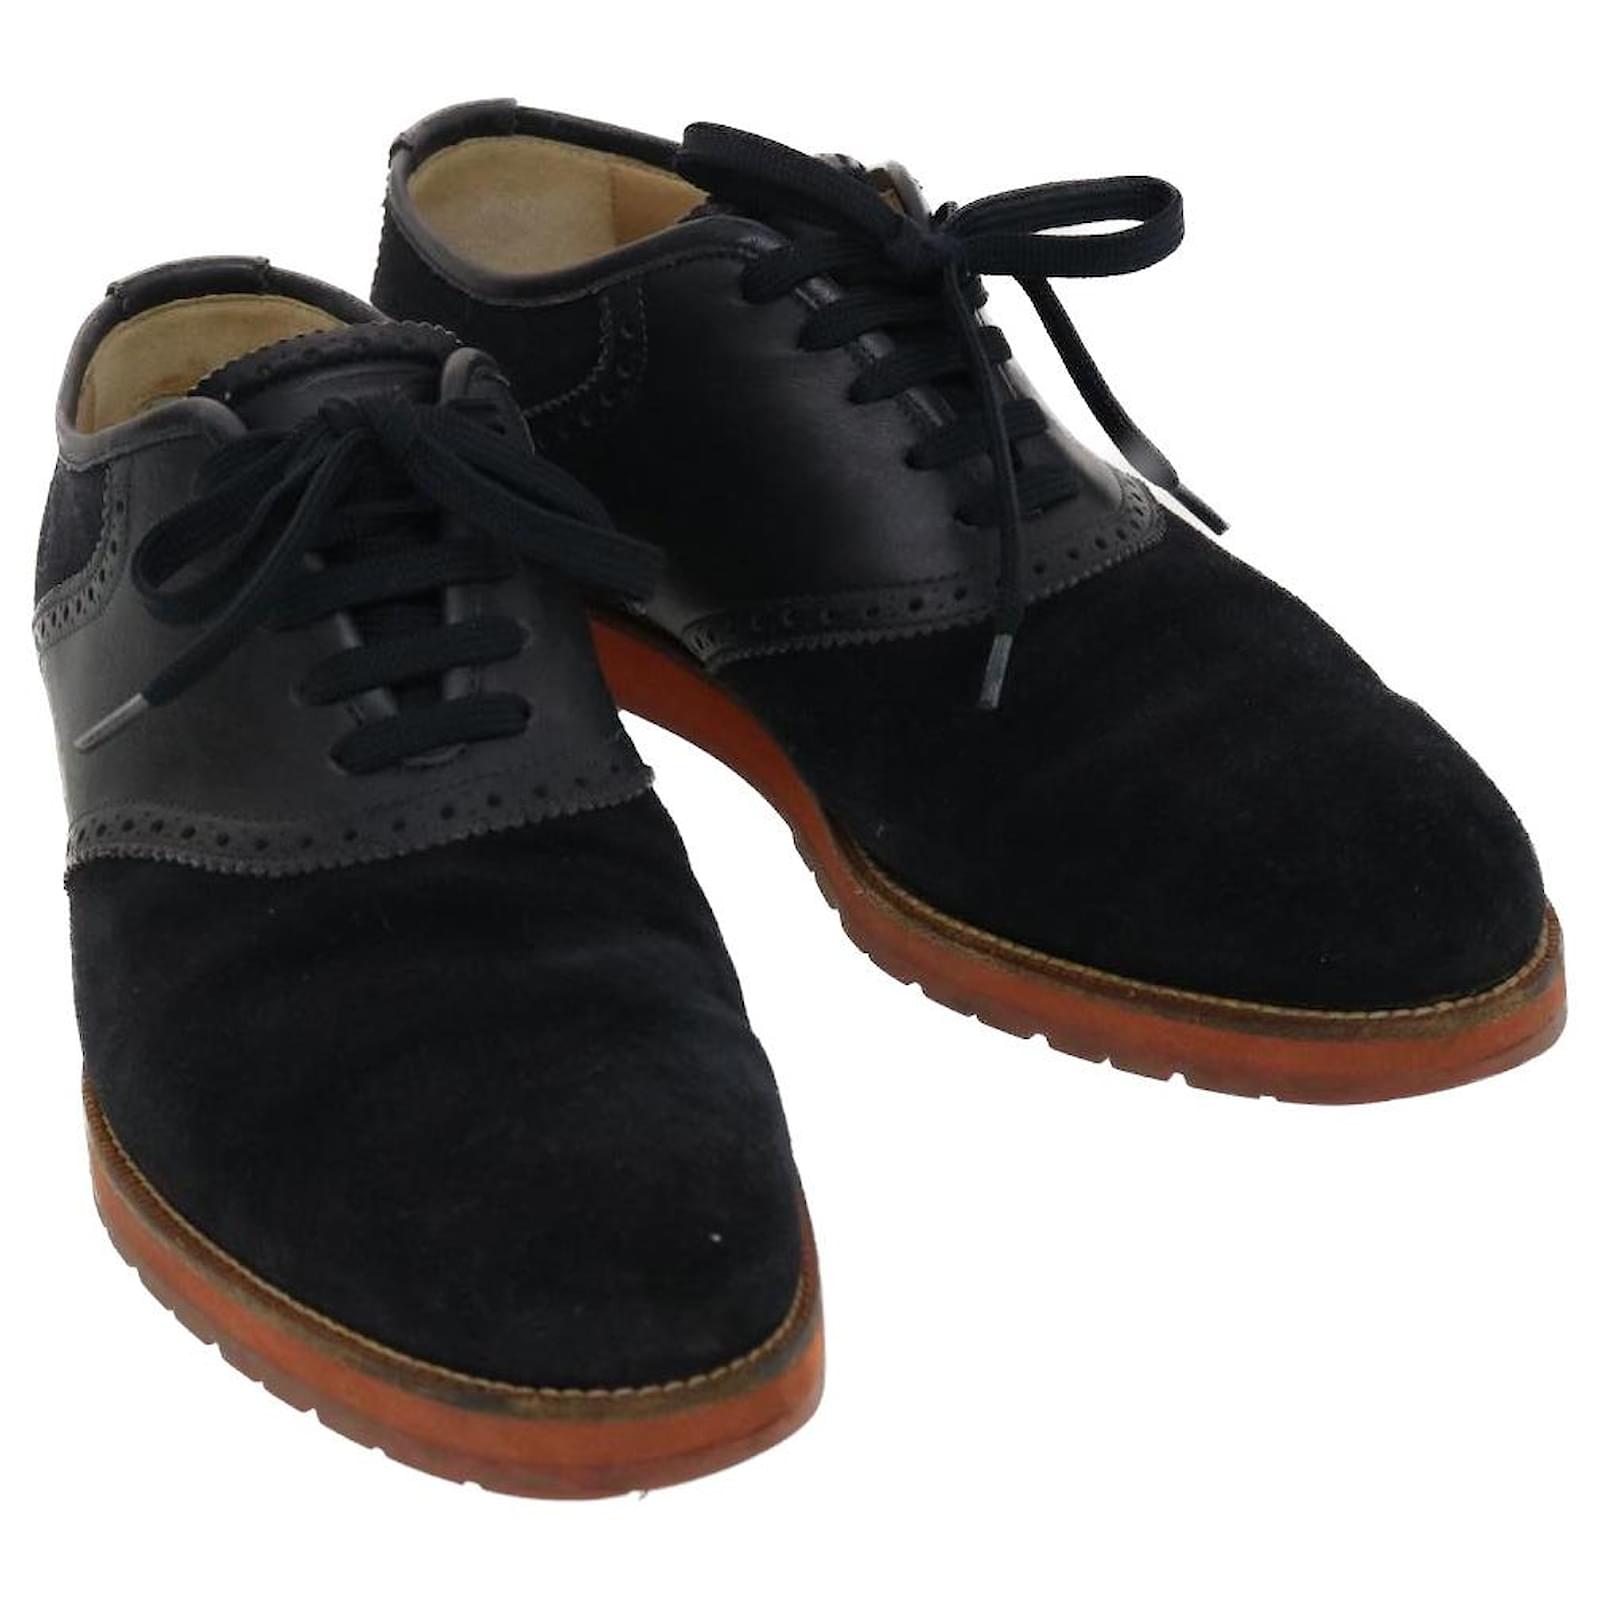 LOUIS VUITTON LEATHER SUEDE LEATHER SHOE  Suede leather shoes, Louis  vuitton men shoes, Suede leather